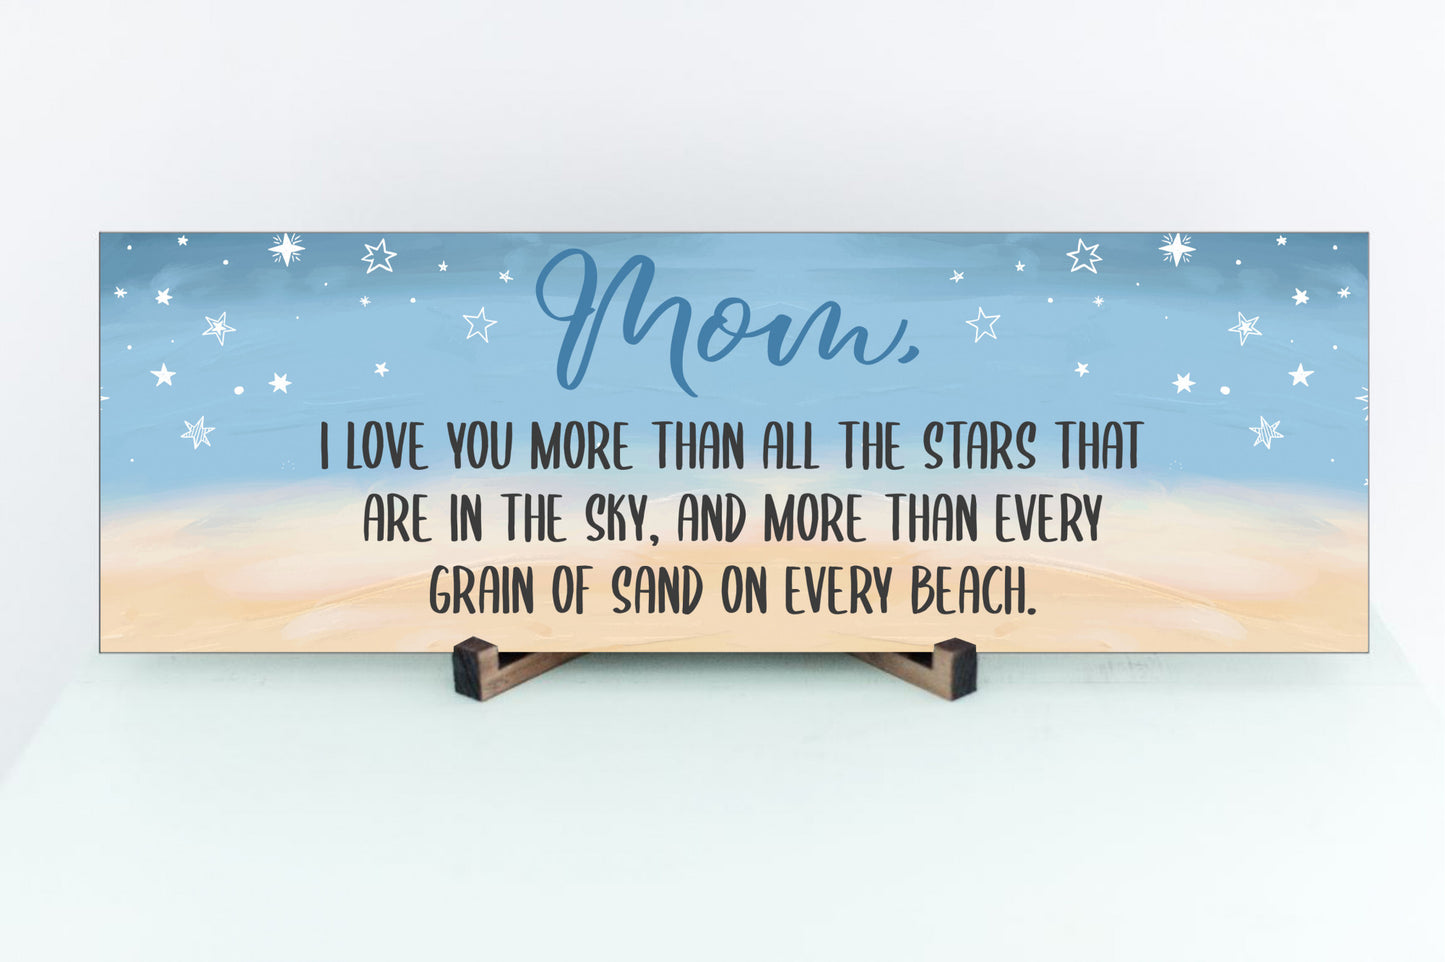 Mom, I Love You More Than All The Stars In The Sky Sign